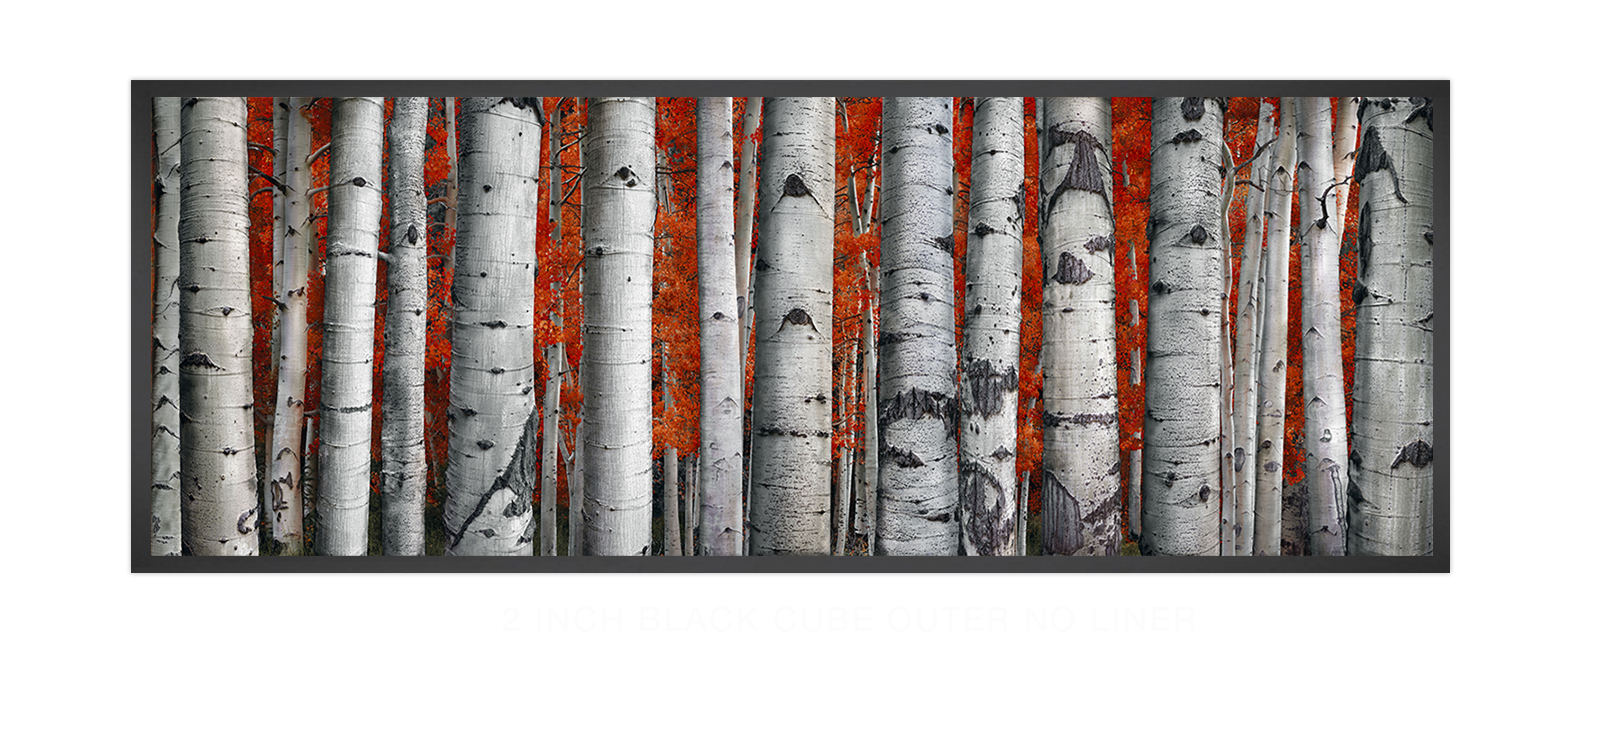 10ASPEN 2 Inch Black Cube Outer w_No Liner T